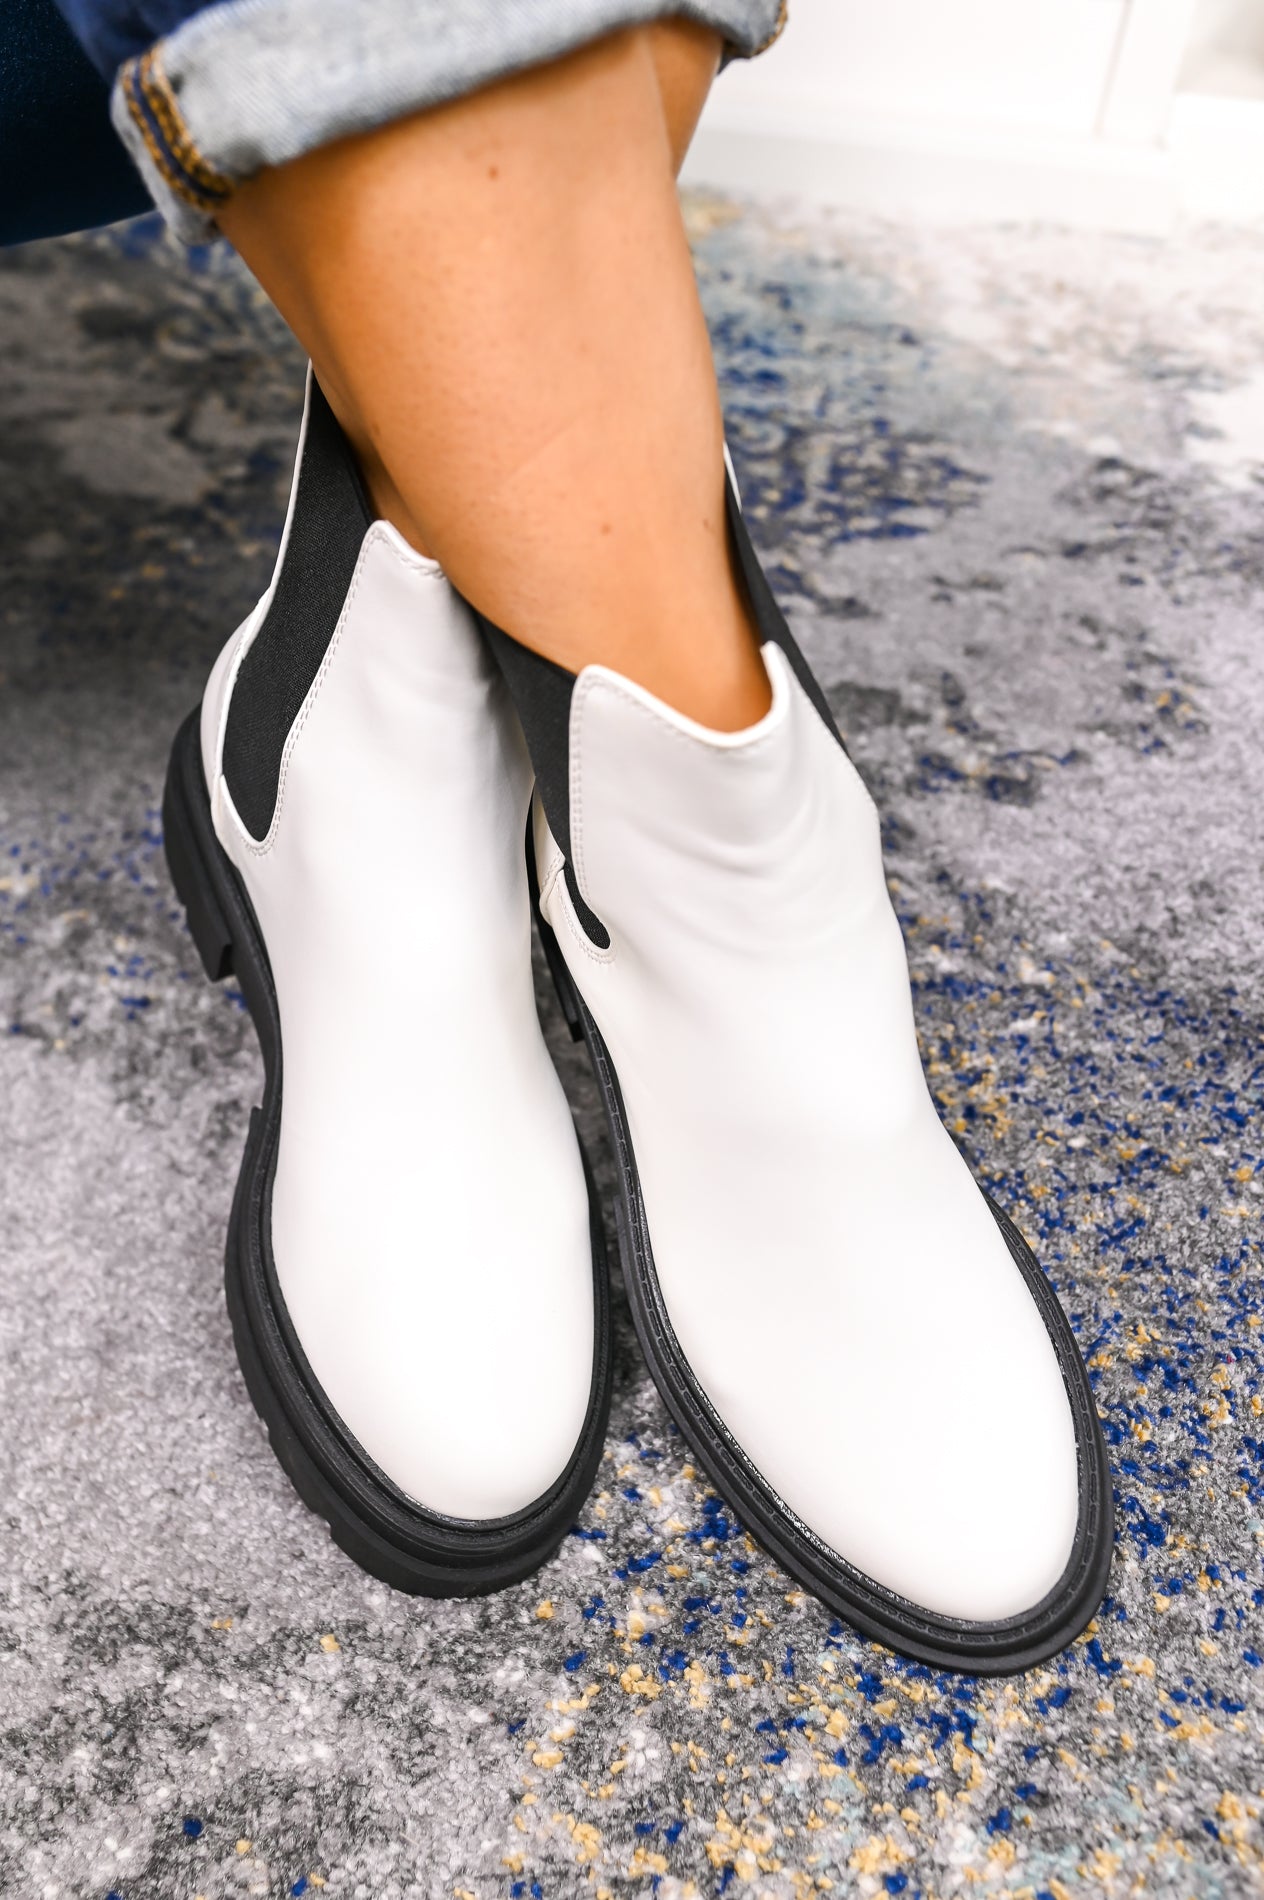 Get On My Level White/Black Slip On Combat Boots - SHO2425WH